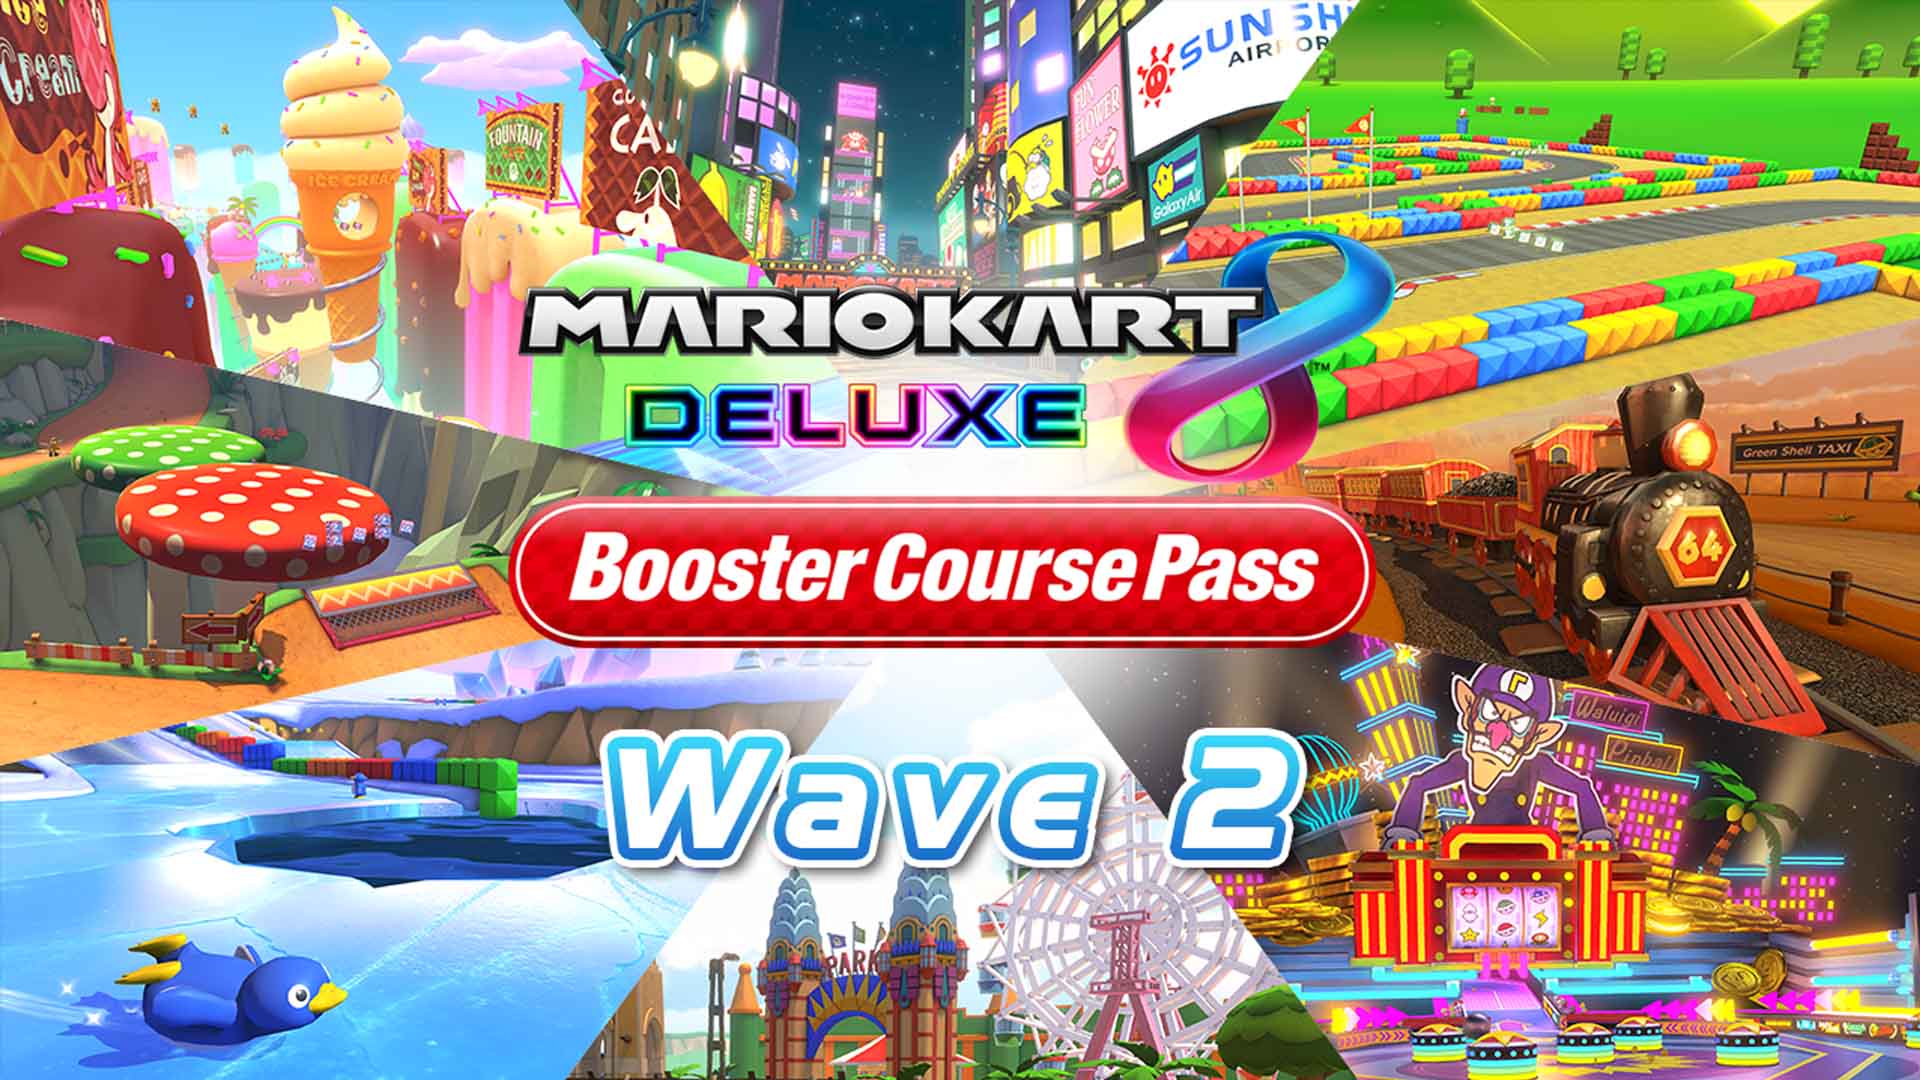 Guide Mario Kart 8 Deluxe Booster Course Pass Wave 2 Nintendo Wire 5769